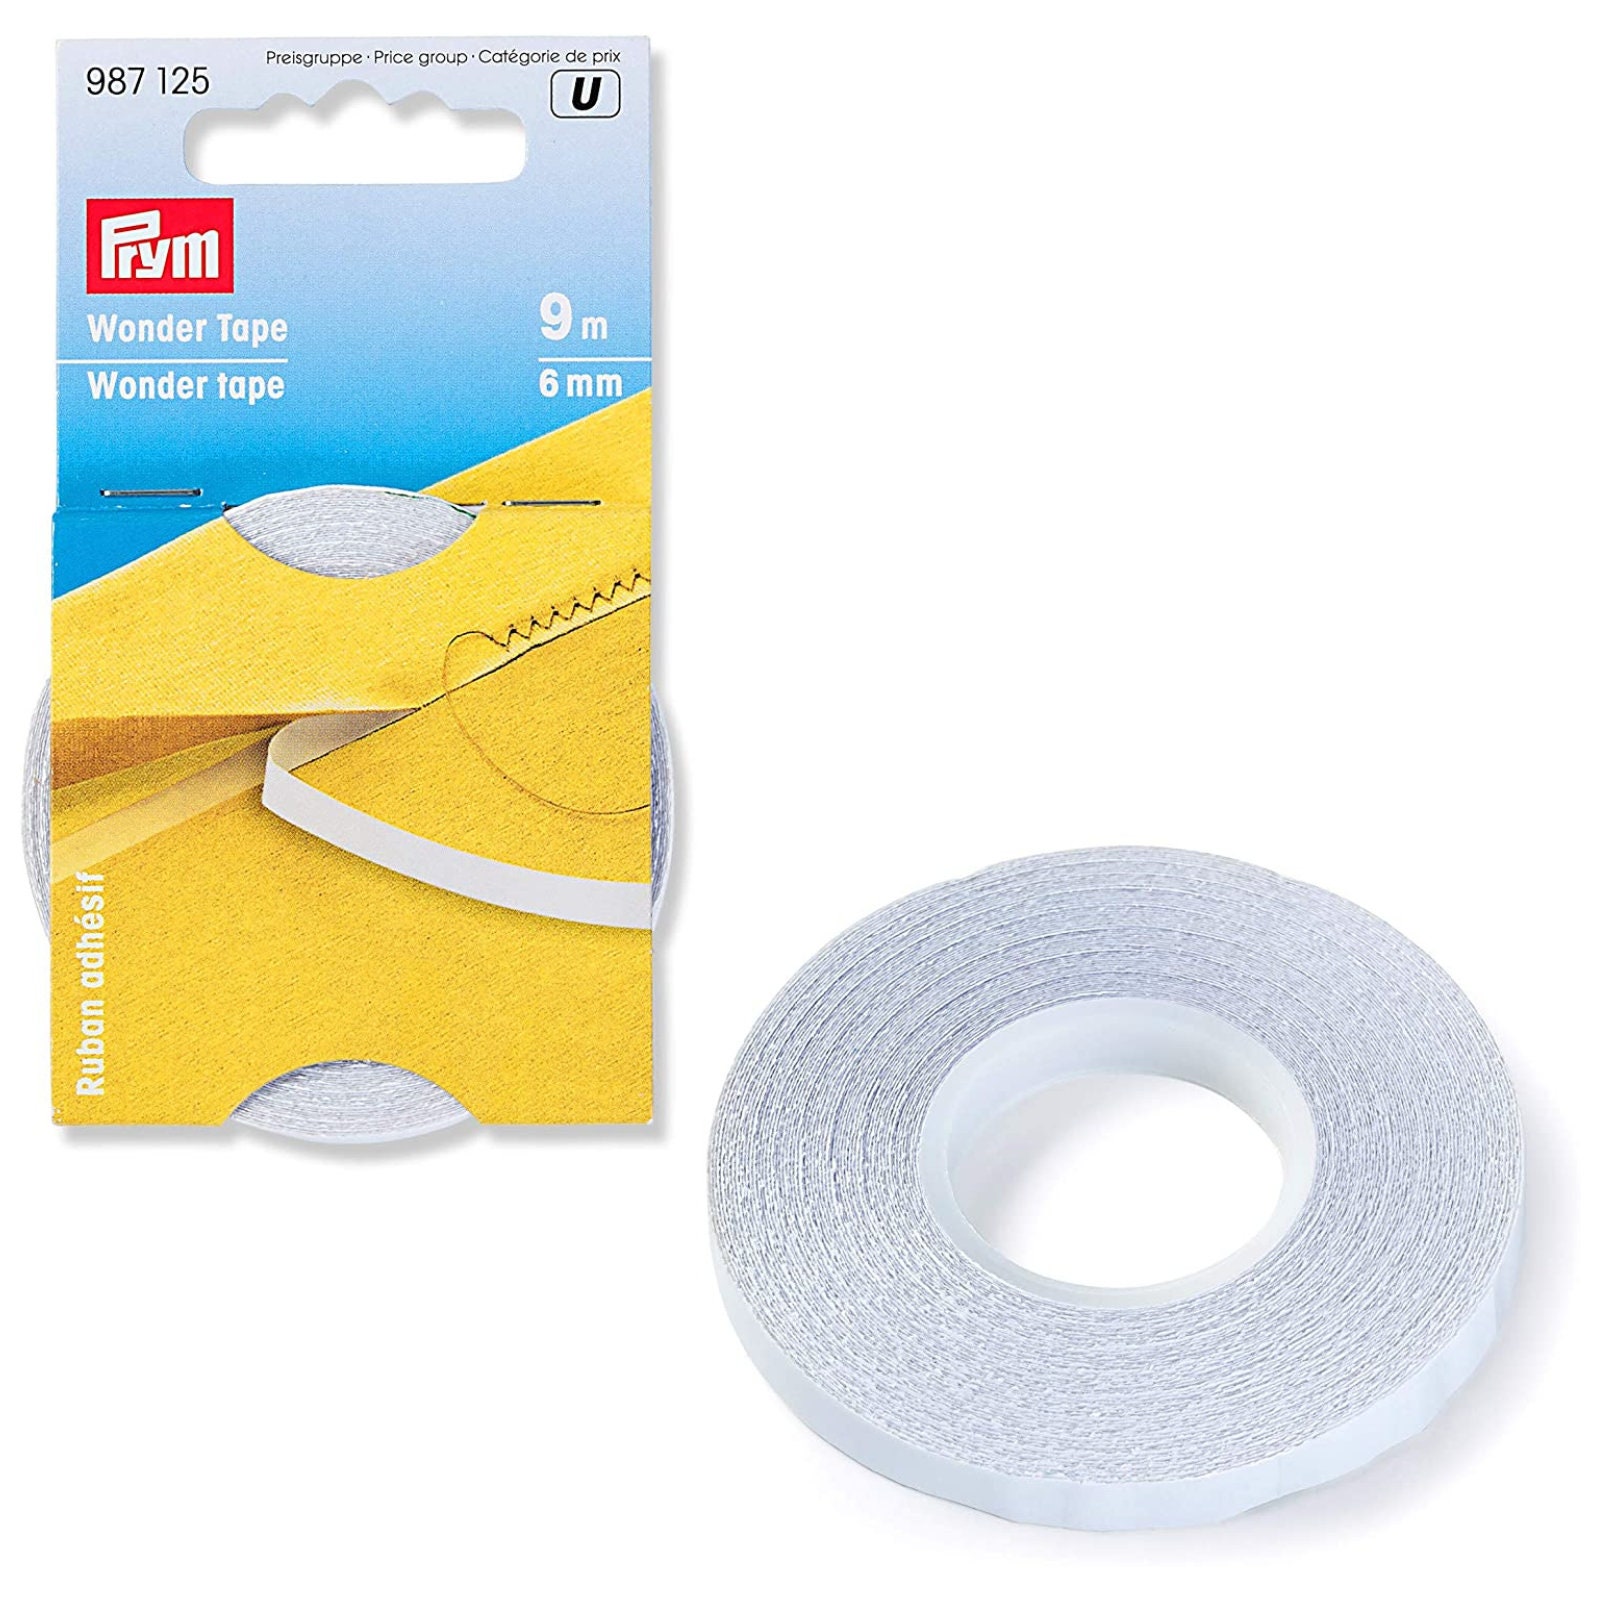 30m Hemming Tape and 2x 150cm Measuring Tape, 40mm No Sewing Tape